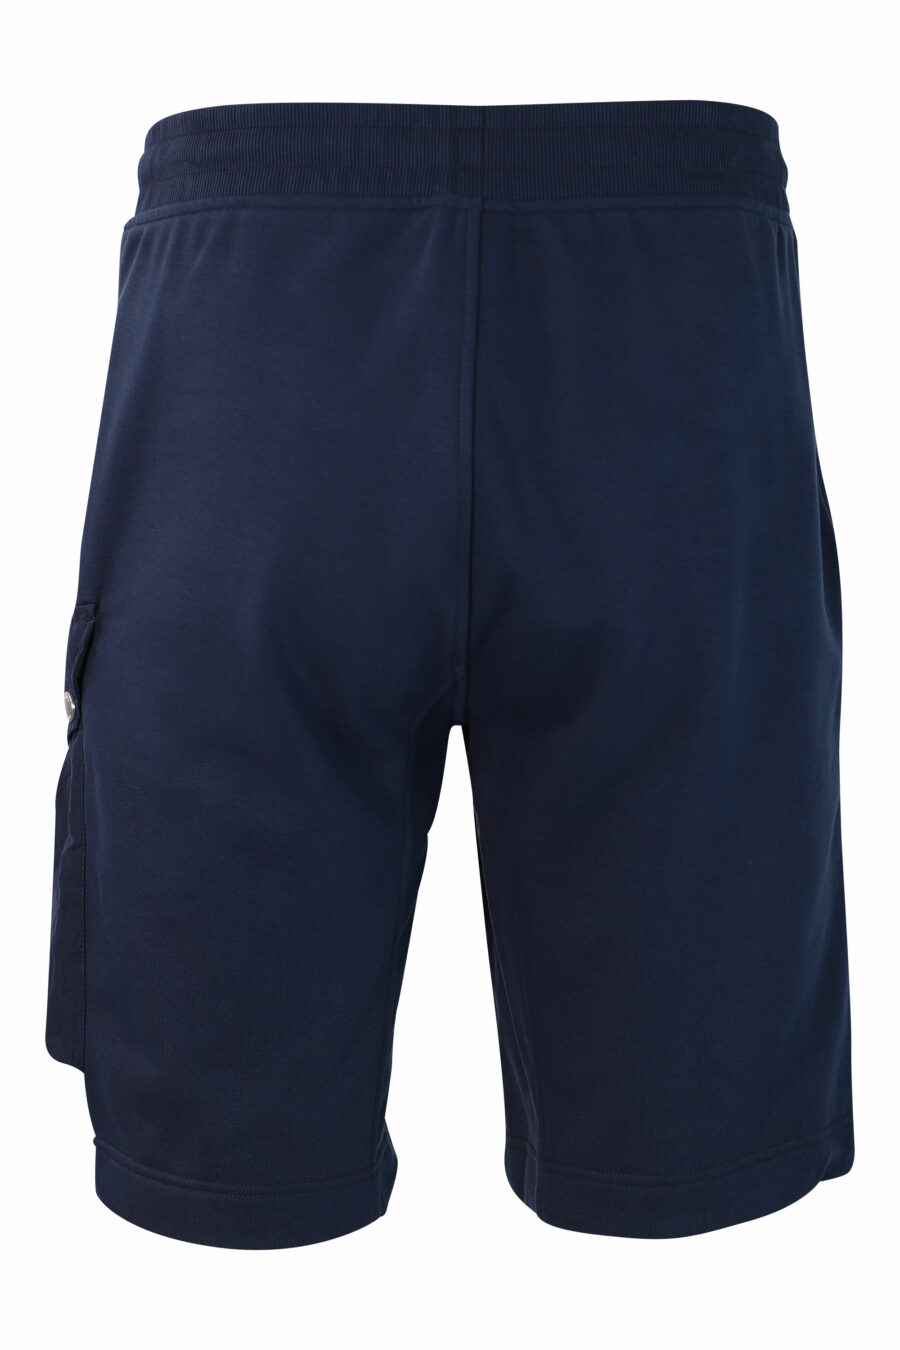 Tracksuit bottoms blue with side pocket - IMG 9875 1